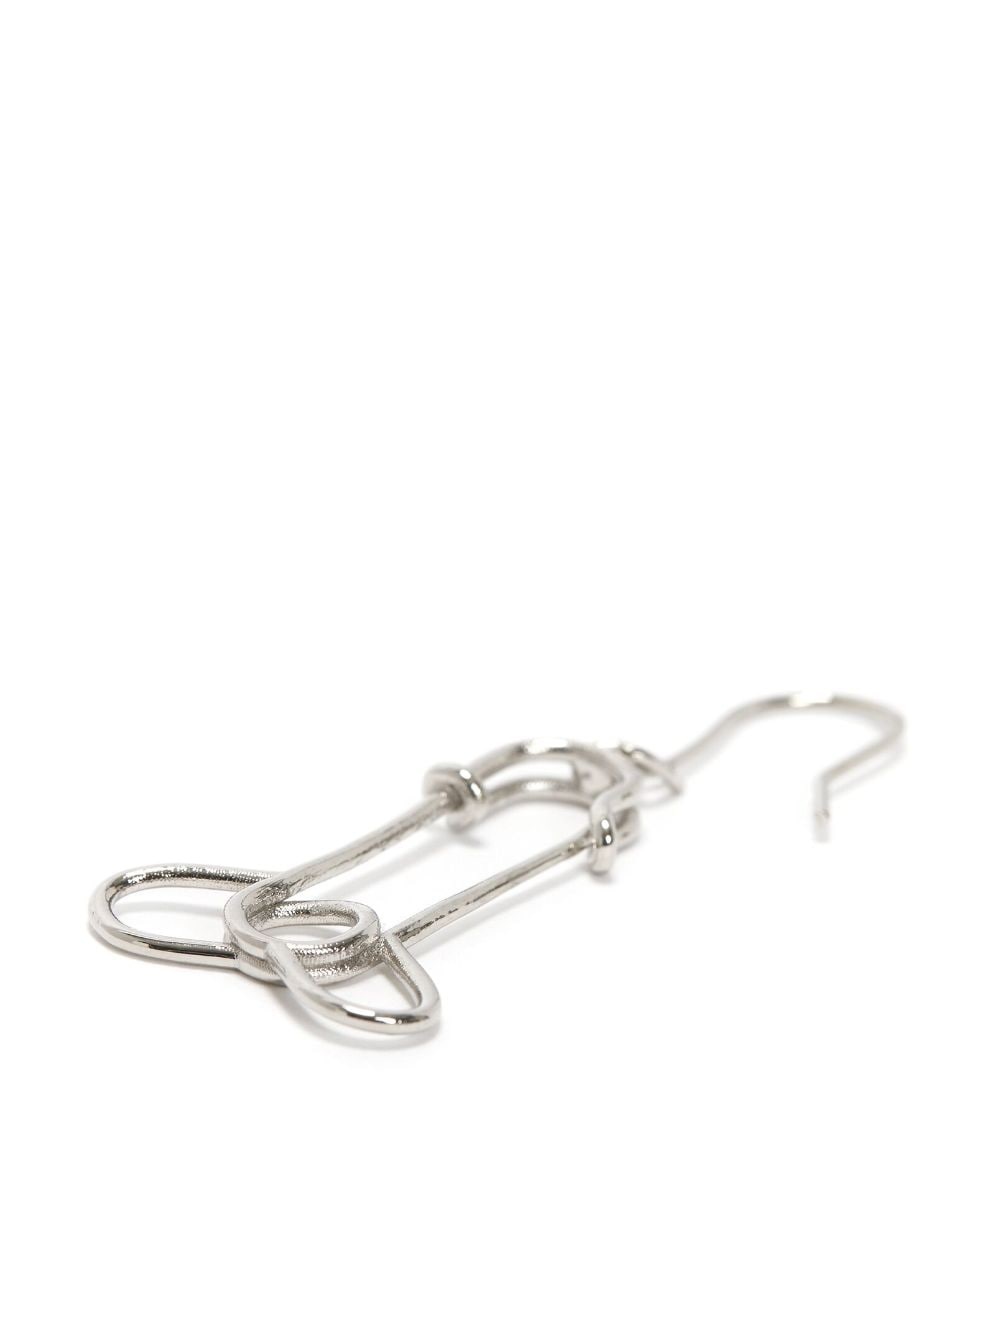 safety-pin pendant earrings - 3